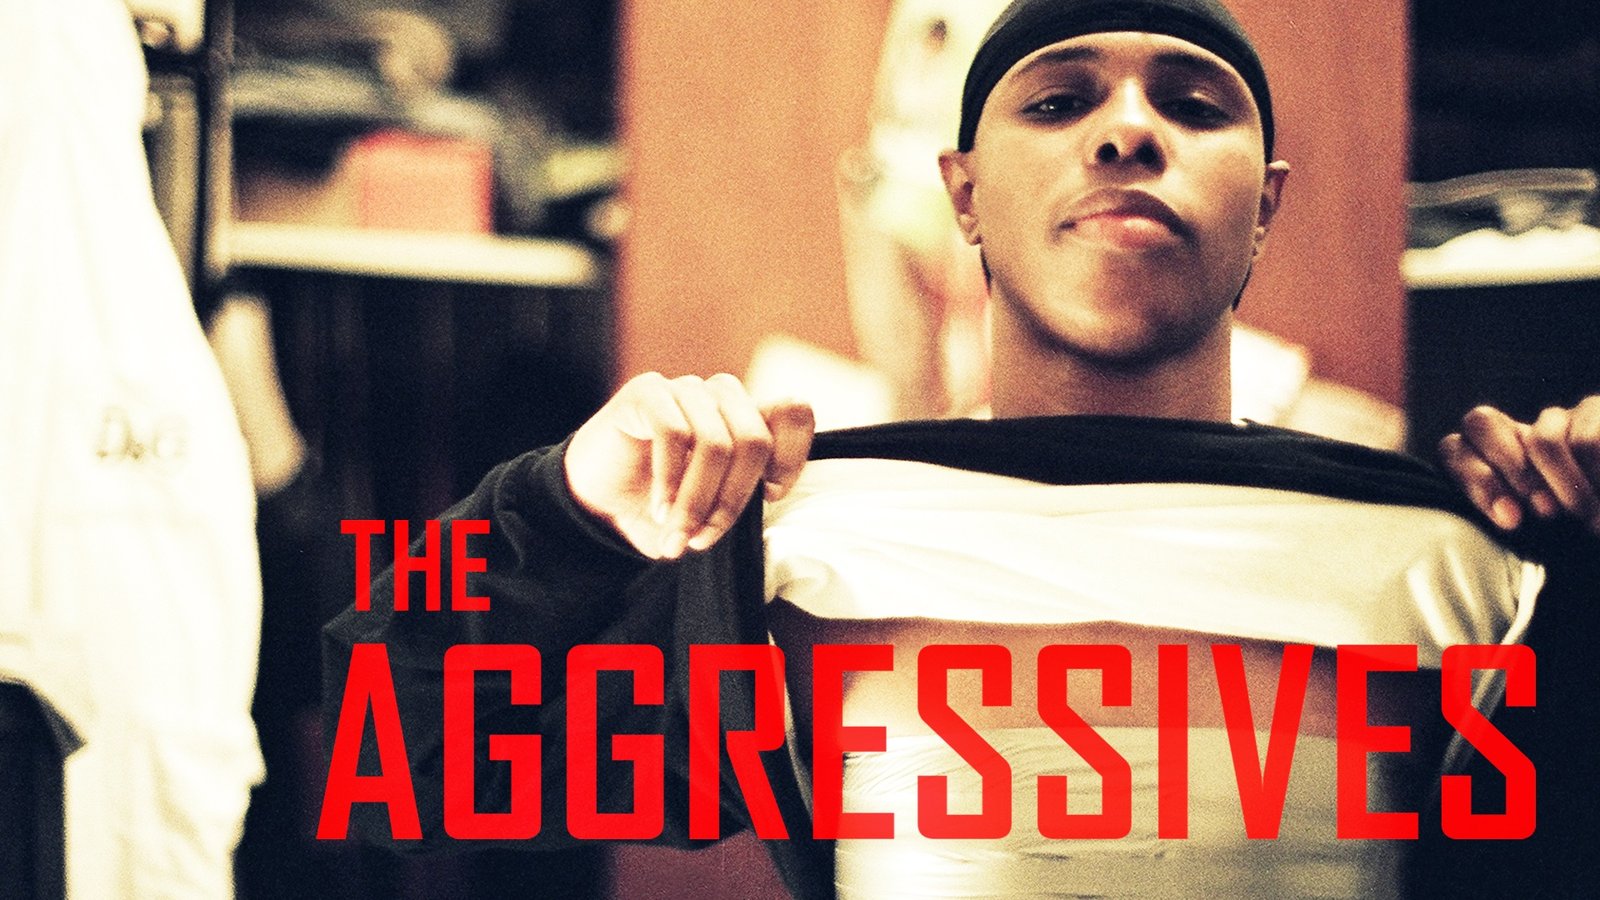 The Aggressives - The World of Lesbian Subcultures